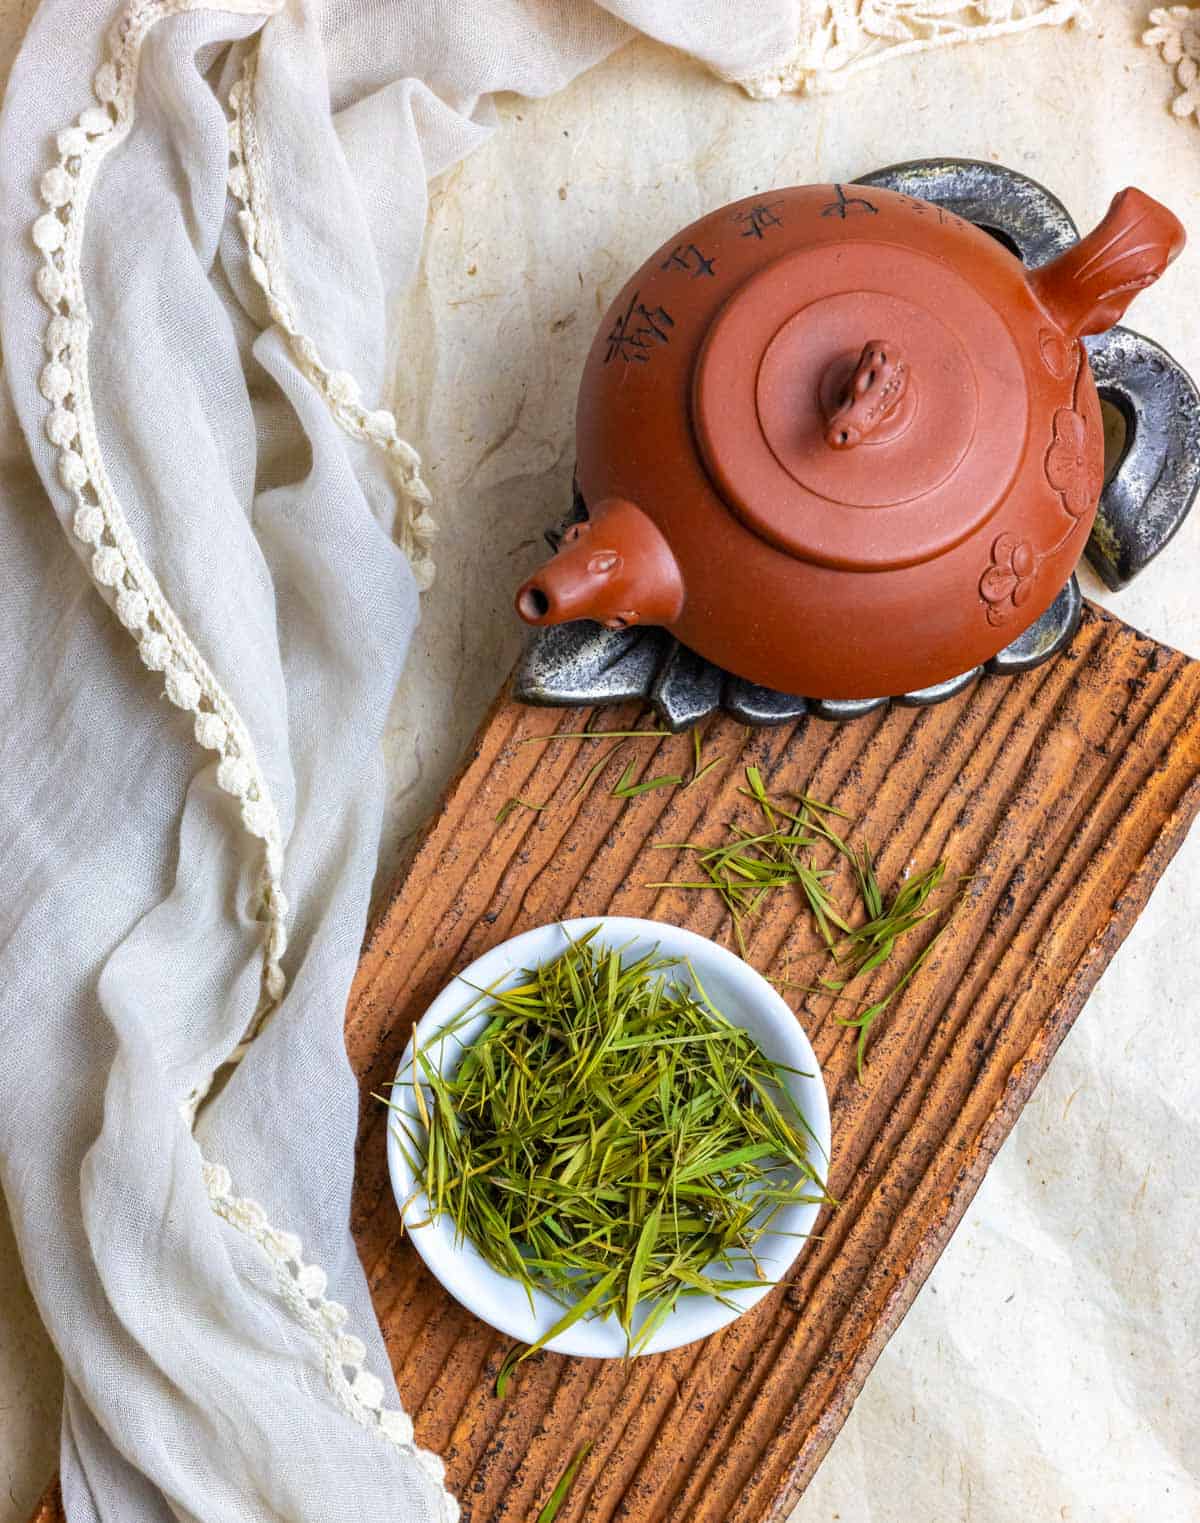 Clay pot on a trivet on a clay board with a white bowl of loose tea leaves.